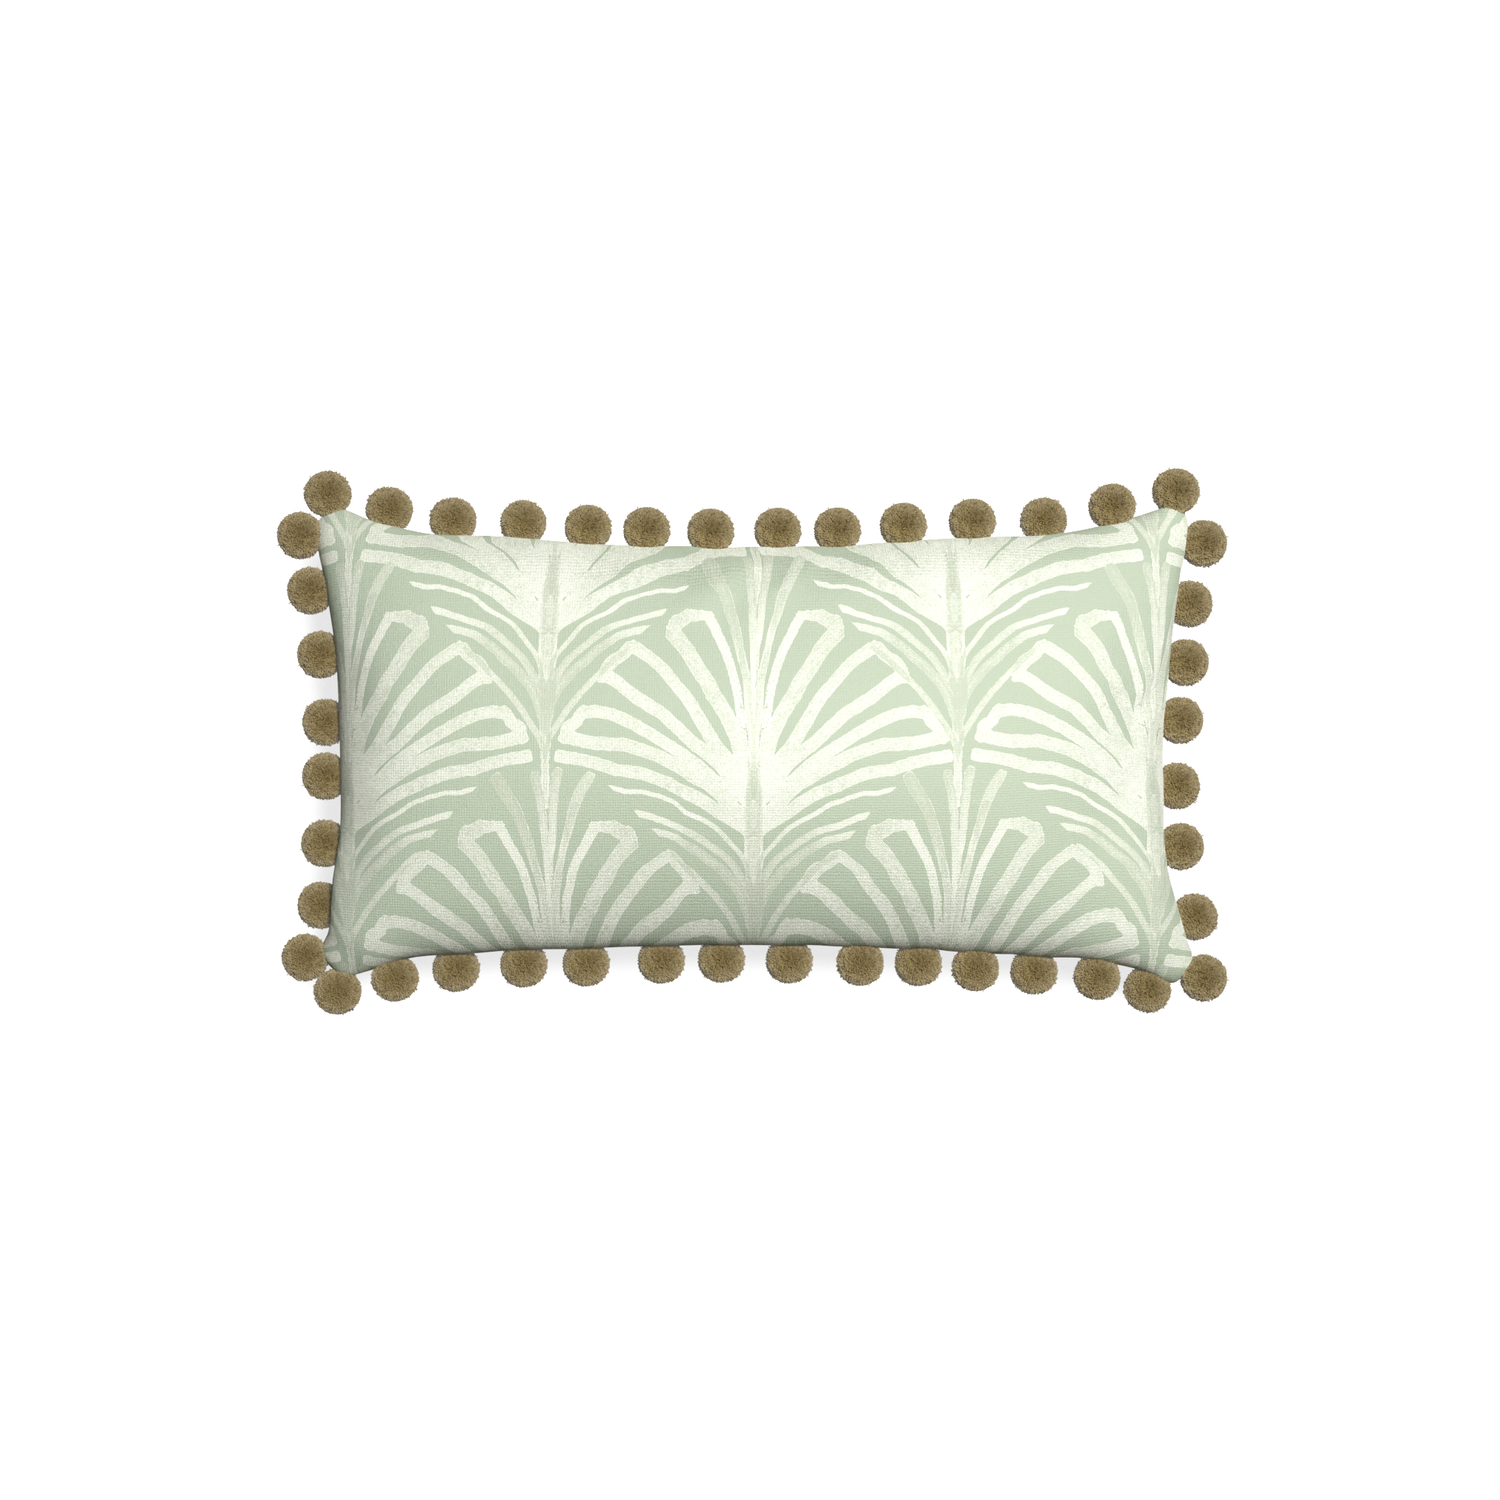 Petite-lumbar suzy sage custom sage green palmpillow with olive pom pom on white background